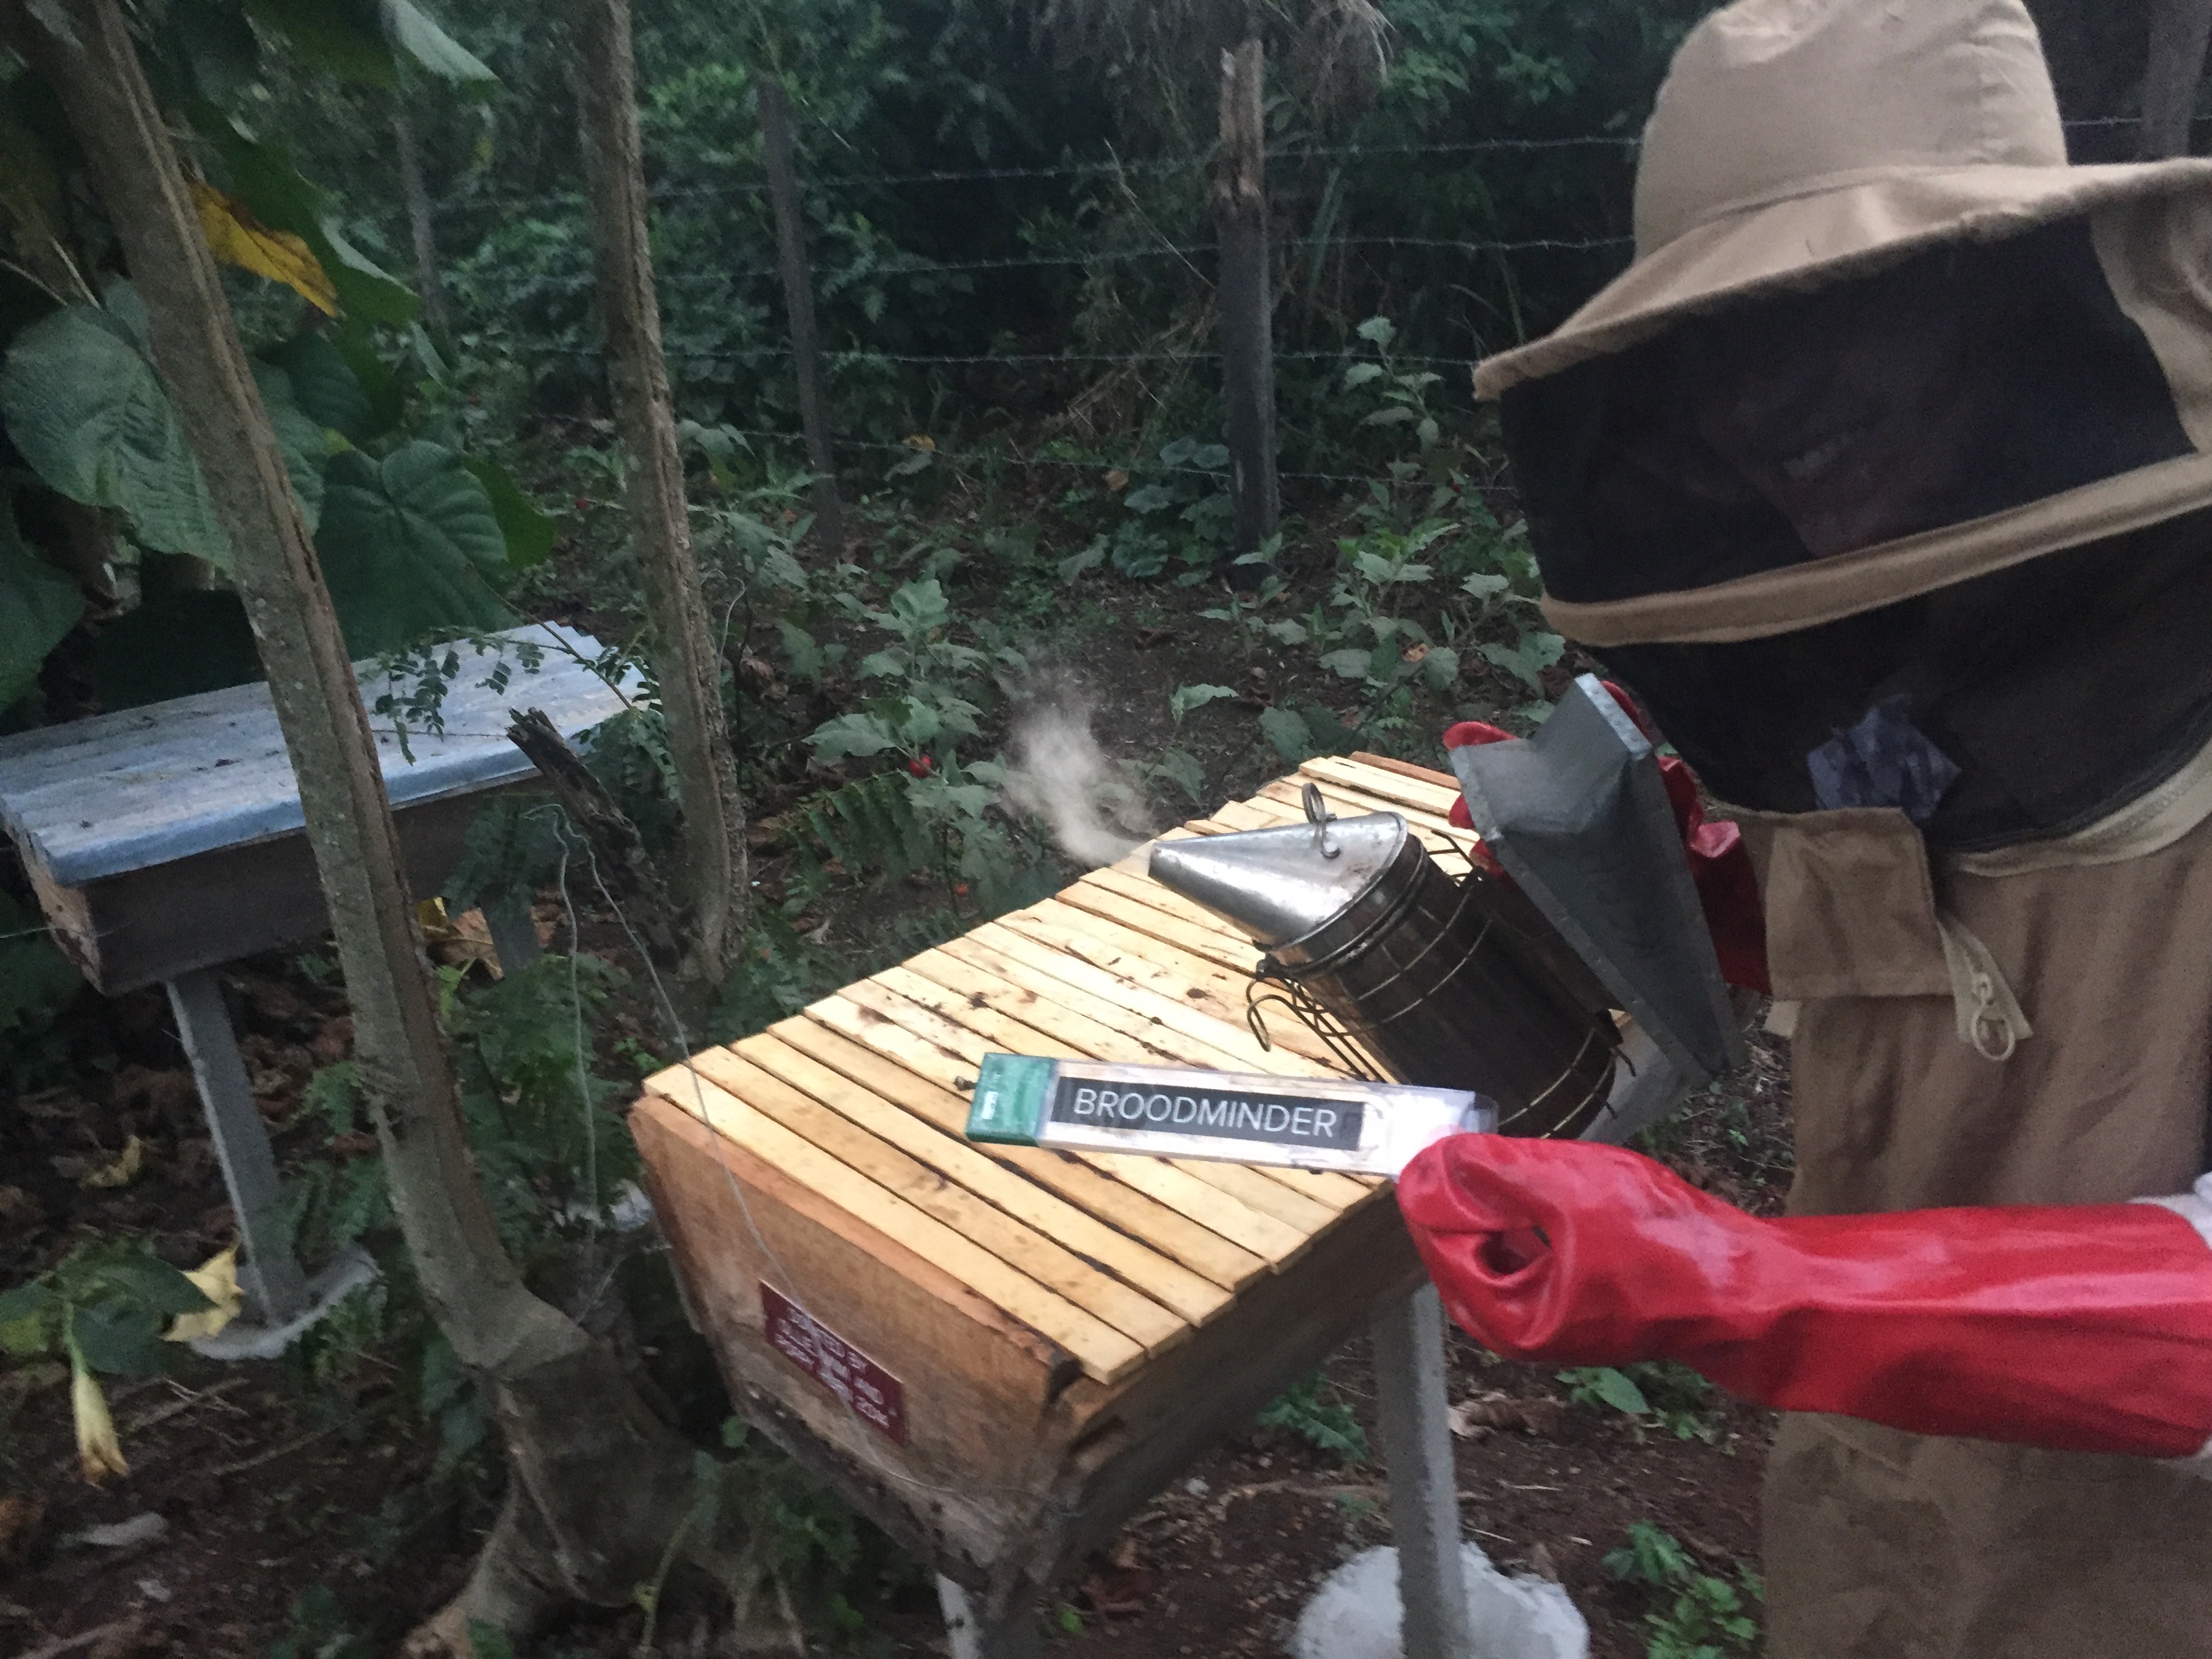 Pictured is Scout weilding a 'Broodminder' device, which she helped beekeepers to install to enhance apiary management during her internship with the Kasiisi Project. These devices automatically collect temperature and humidity data from beehives at regular time intervals, and this data can be retrieved simply via Bluetooth-enabled cellular decives